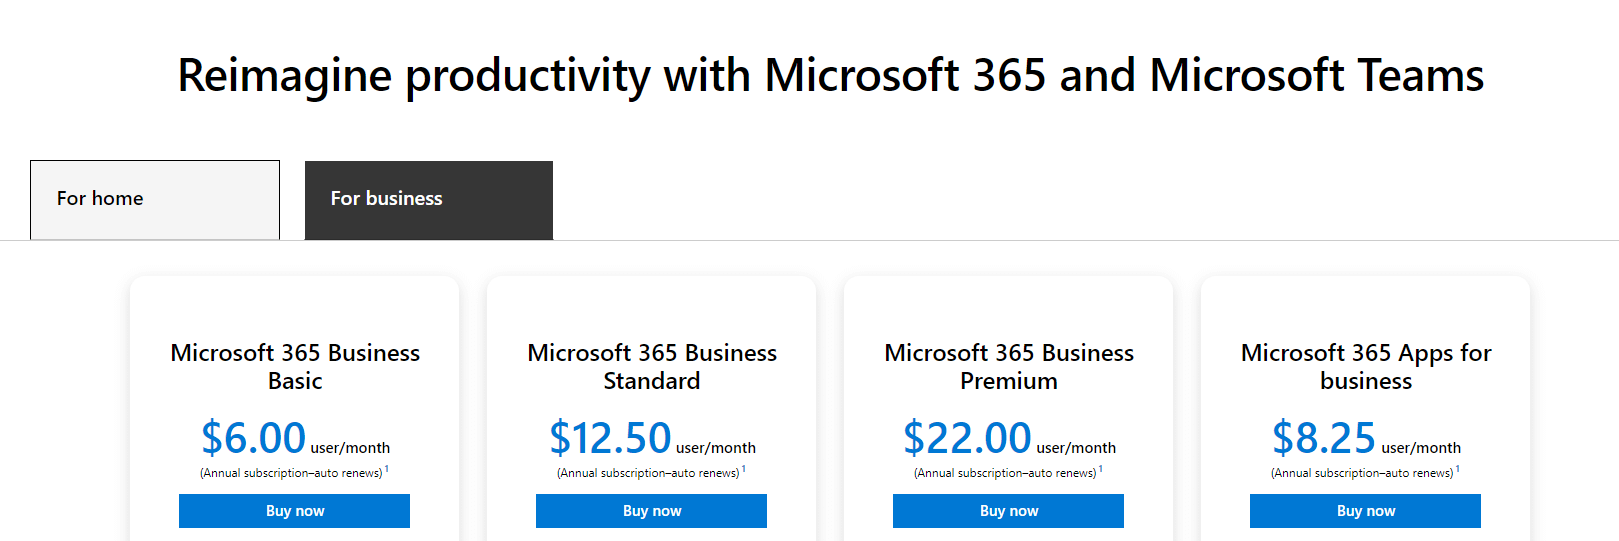 Microsoft Office for Business pricing page.